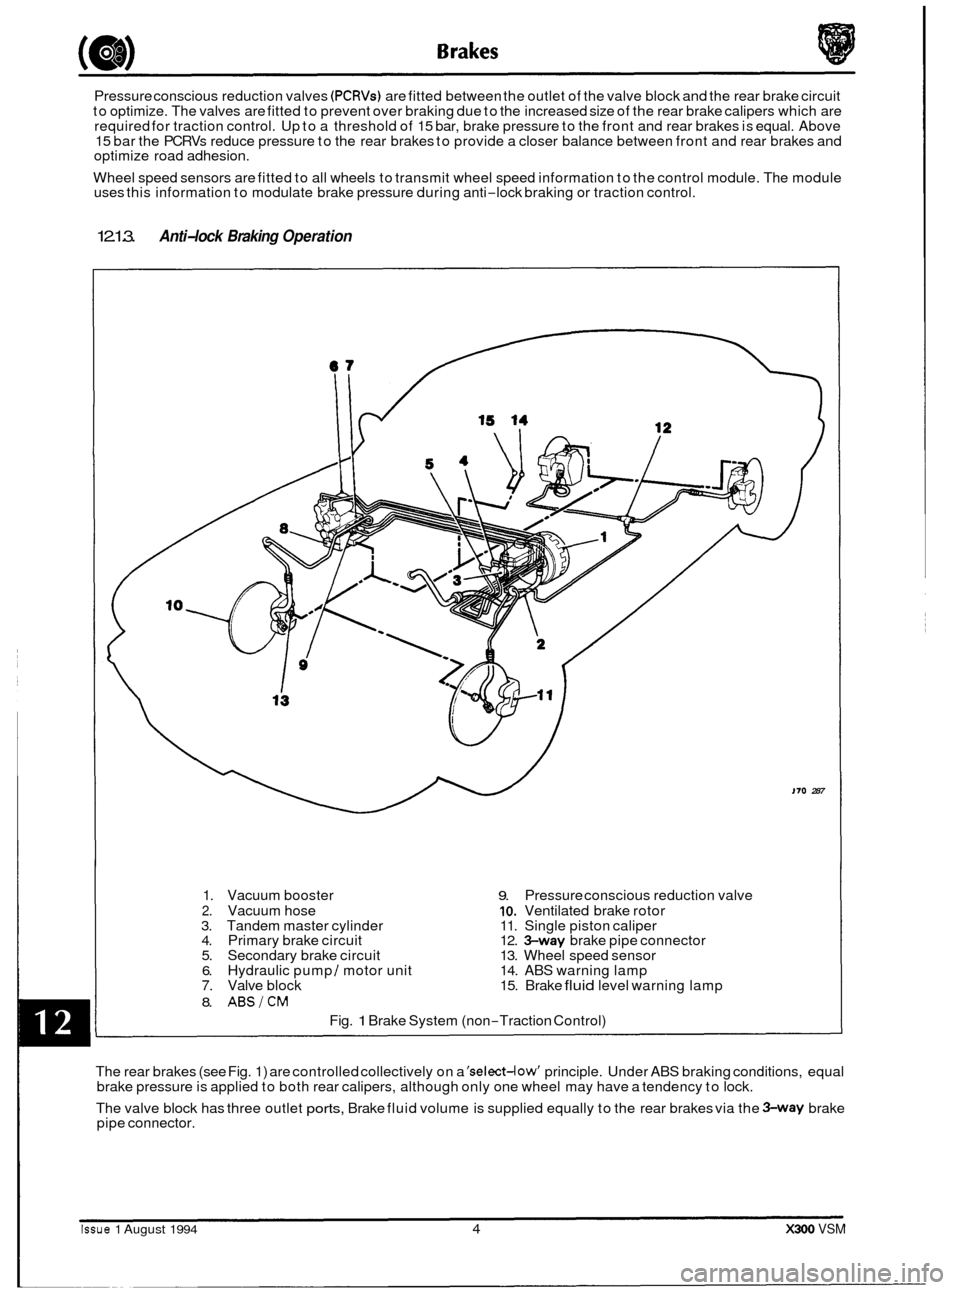 JAGUAR XJ6 1994 2.G User Guide Pressure conscious reduction valves (PCRVs) are fitted  between  the outlet  of the  valve block and  the rear brake  circuit 
to  optimize. The valves are  fitted to prevent  over braking  due to the